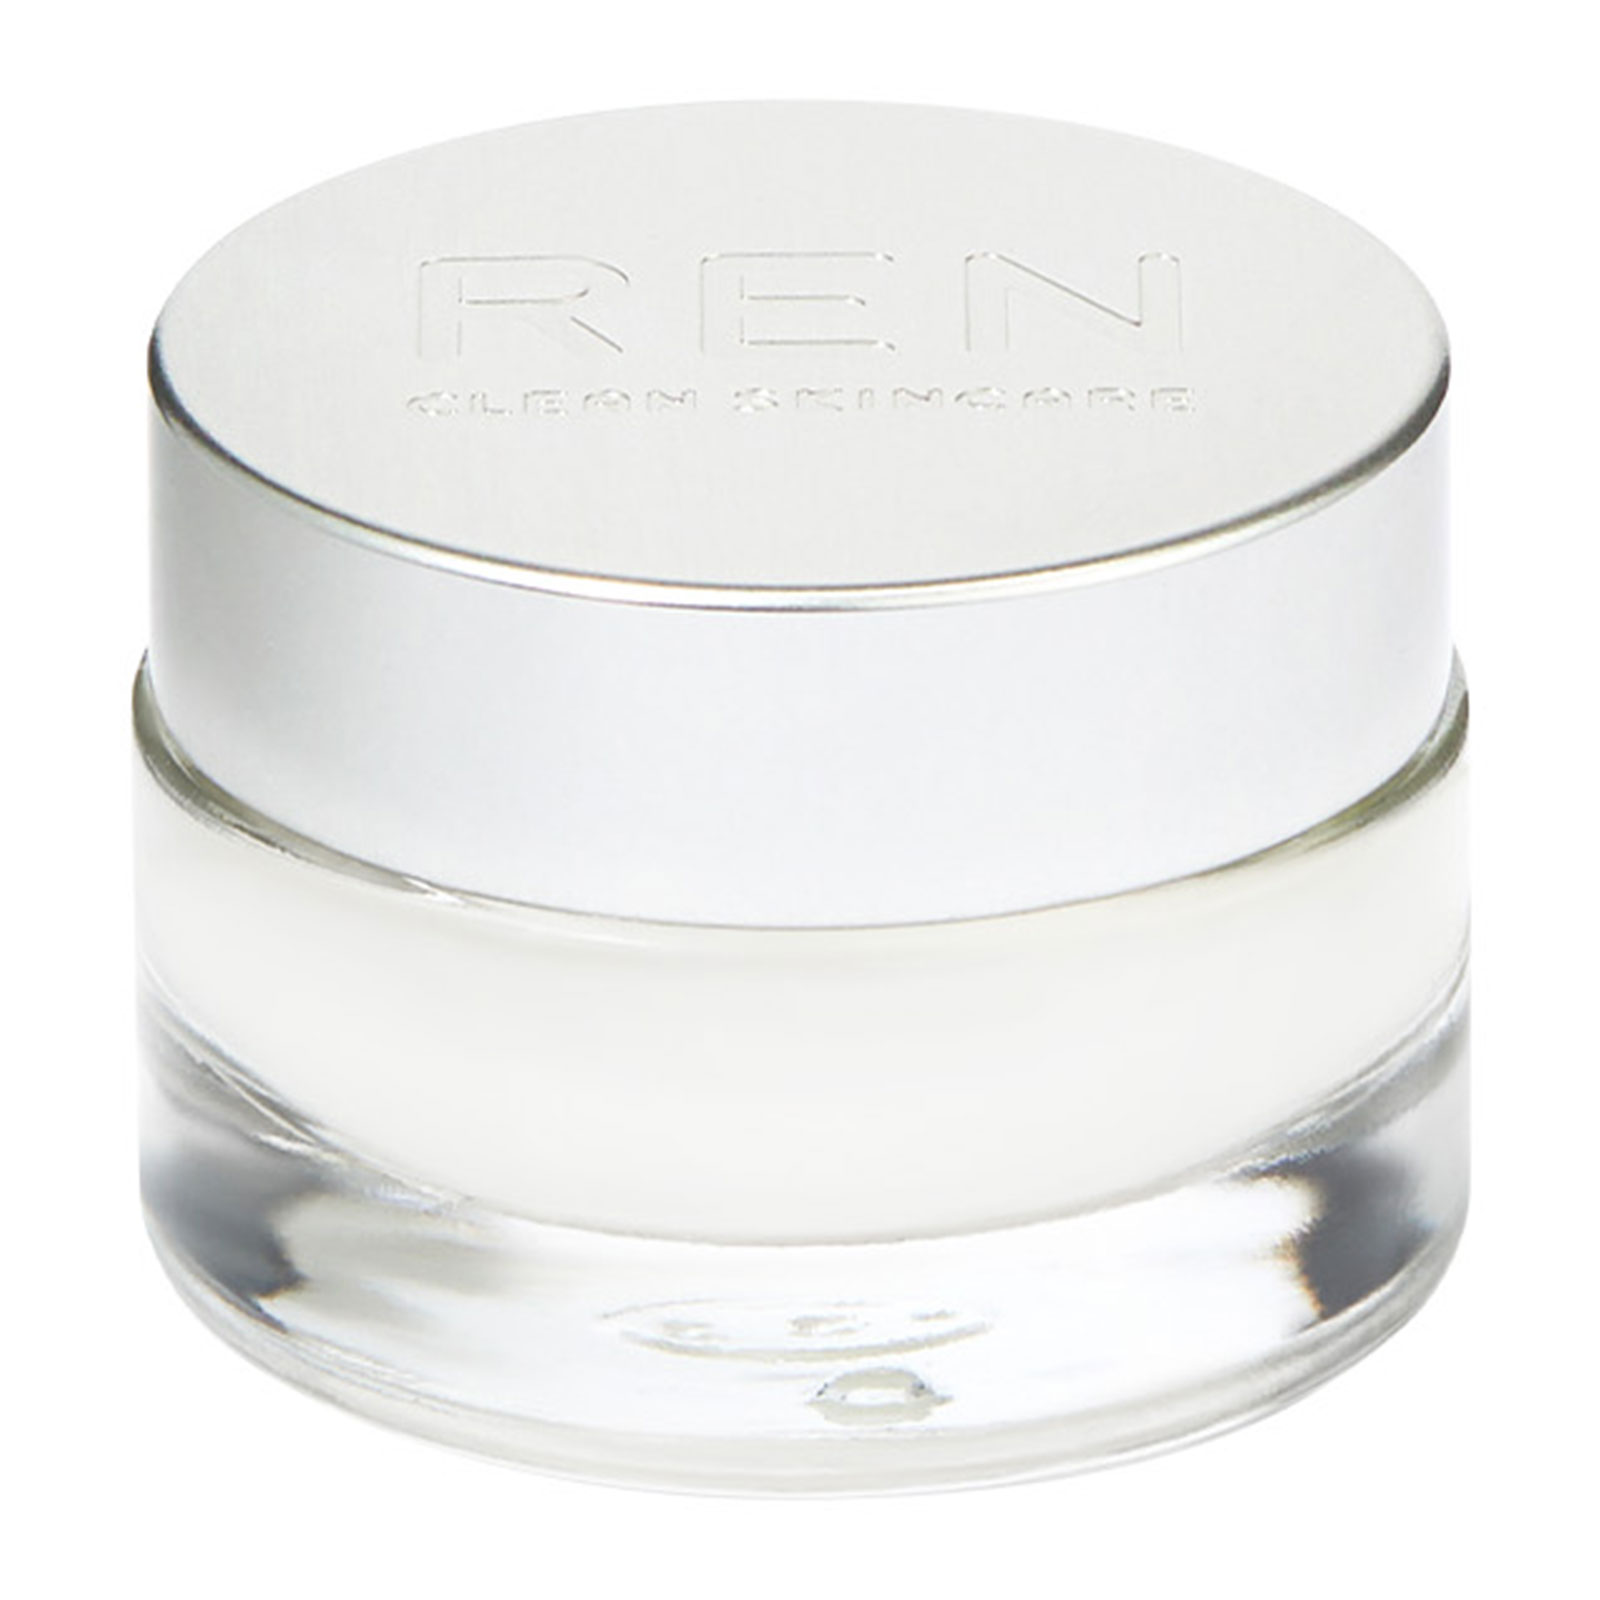 Ren Clean Skincare Evercalm Global Protection Day Cream 15Ml